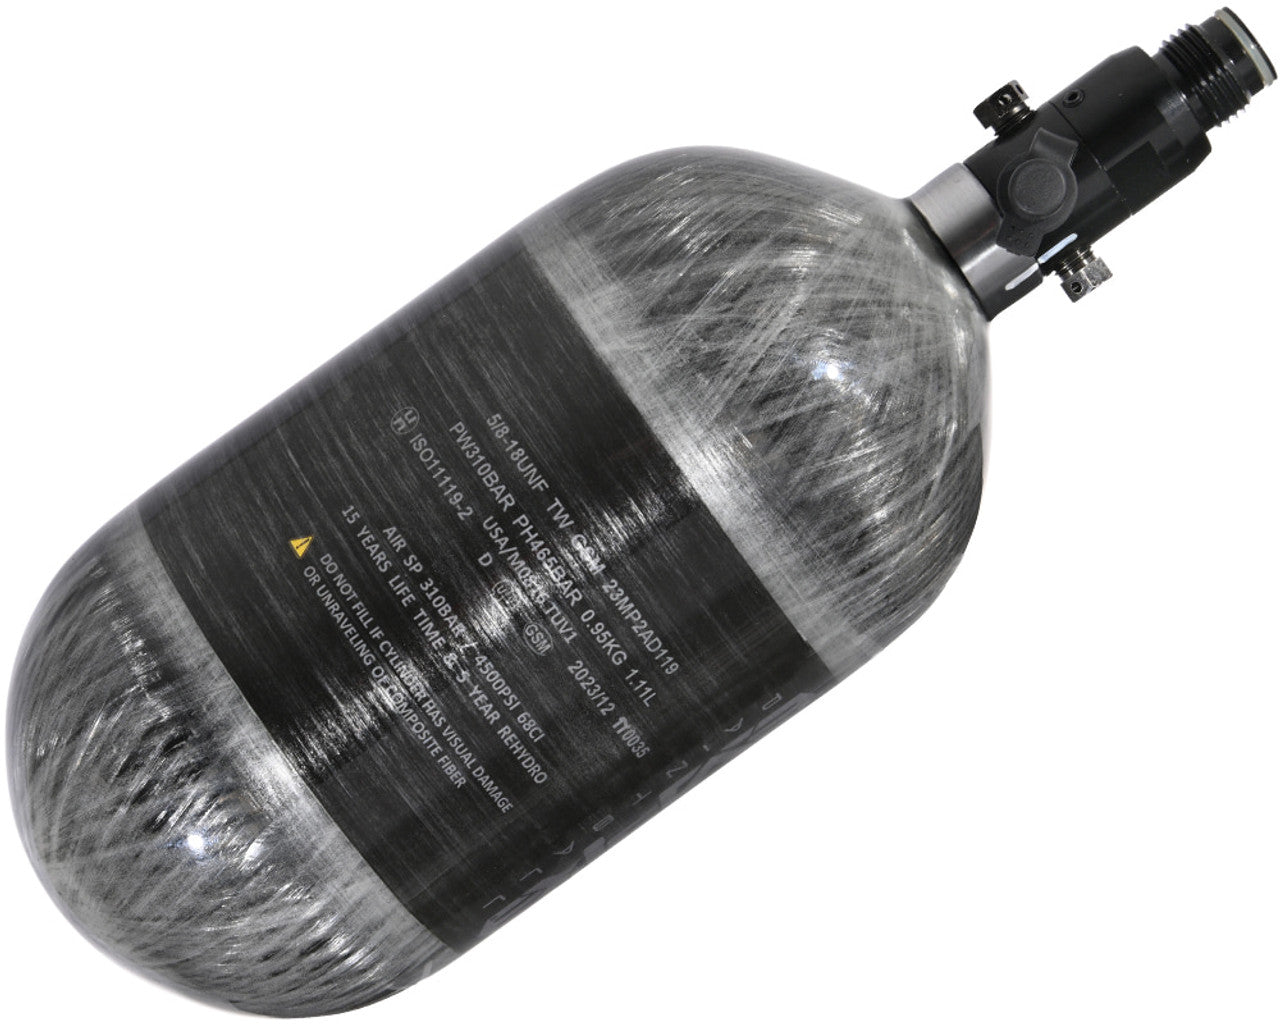 Empire Mega Lite Tri Label 68/4500 Compressed Air Paintball Tank - Grey - Eminent Paintball And Airsoft